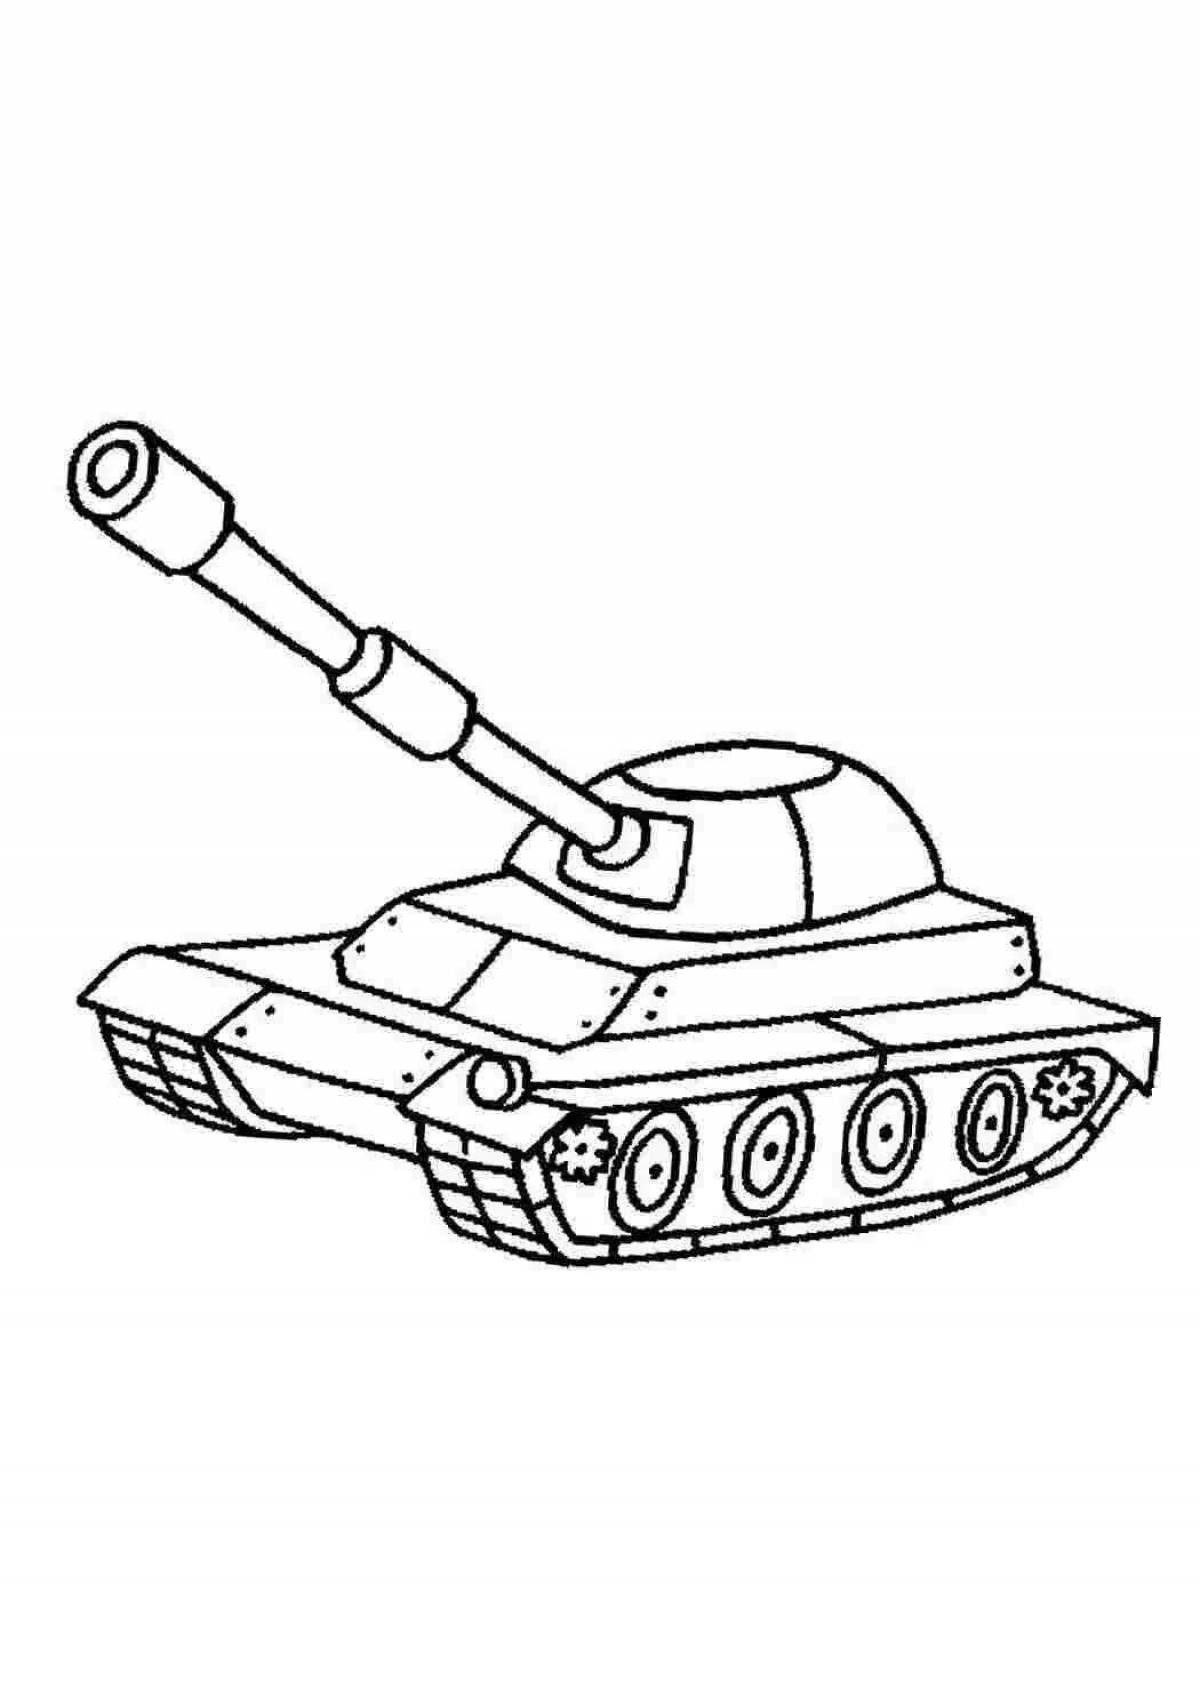 Amazing tanks coloring book for kids